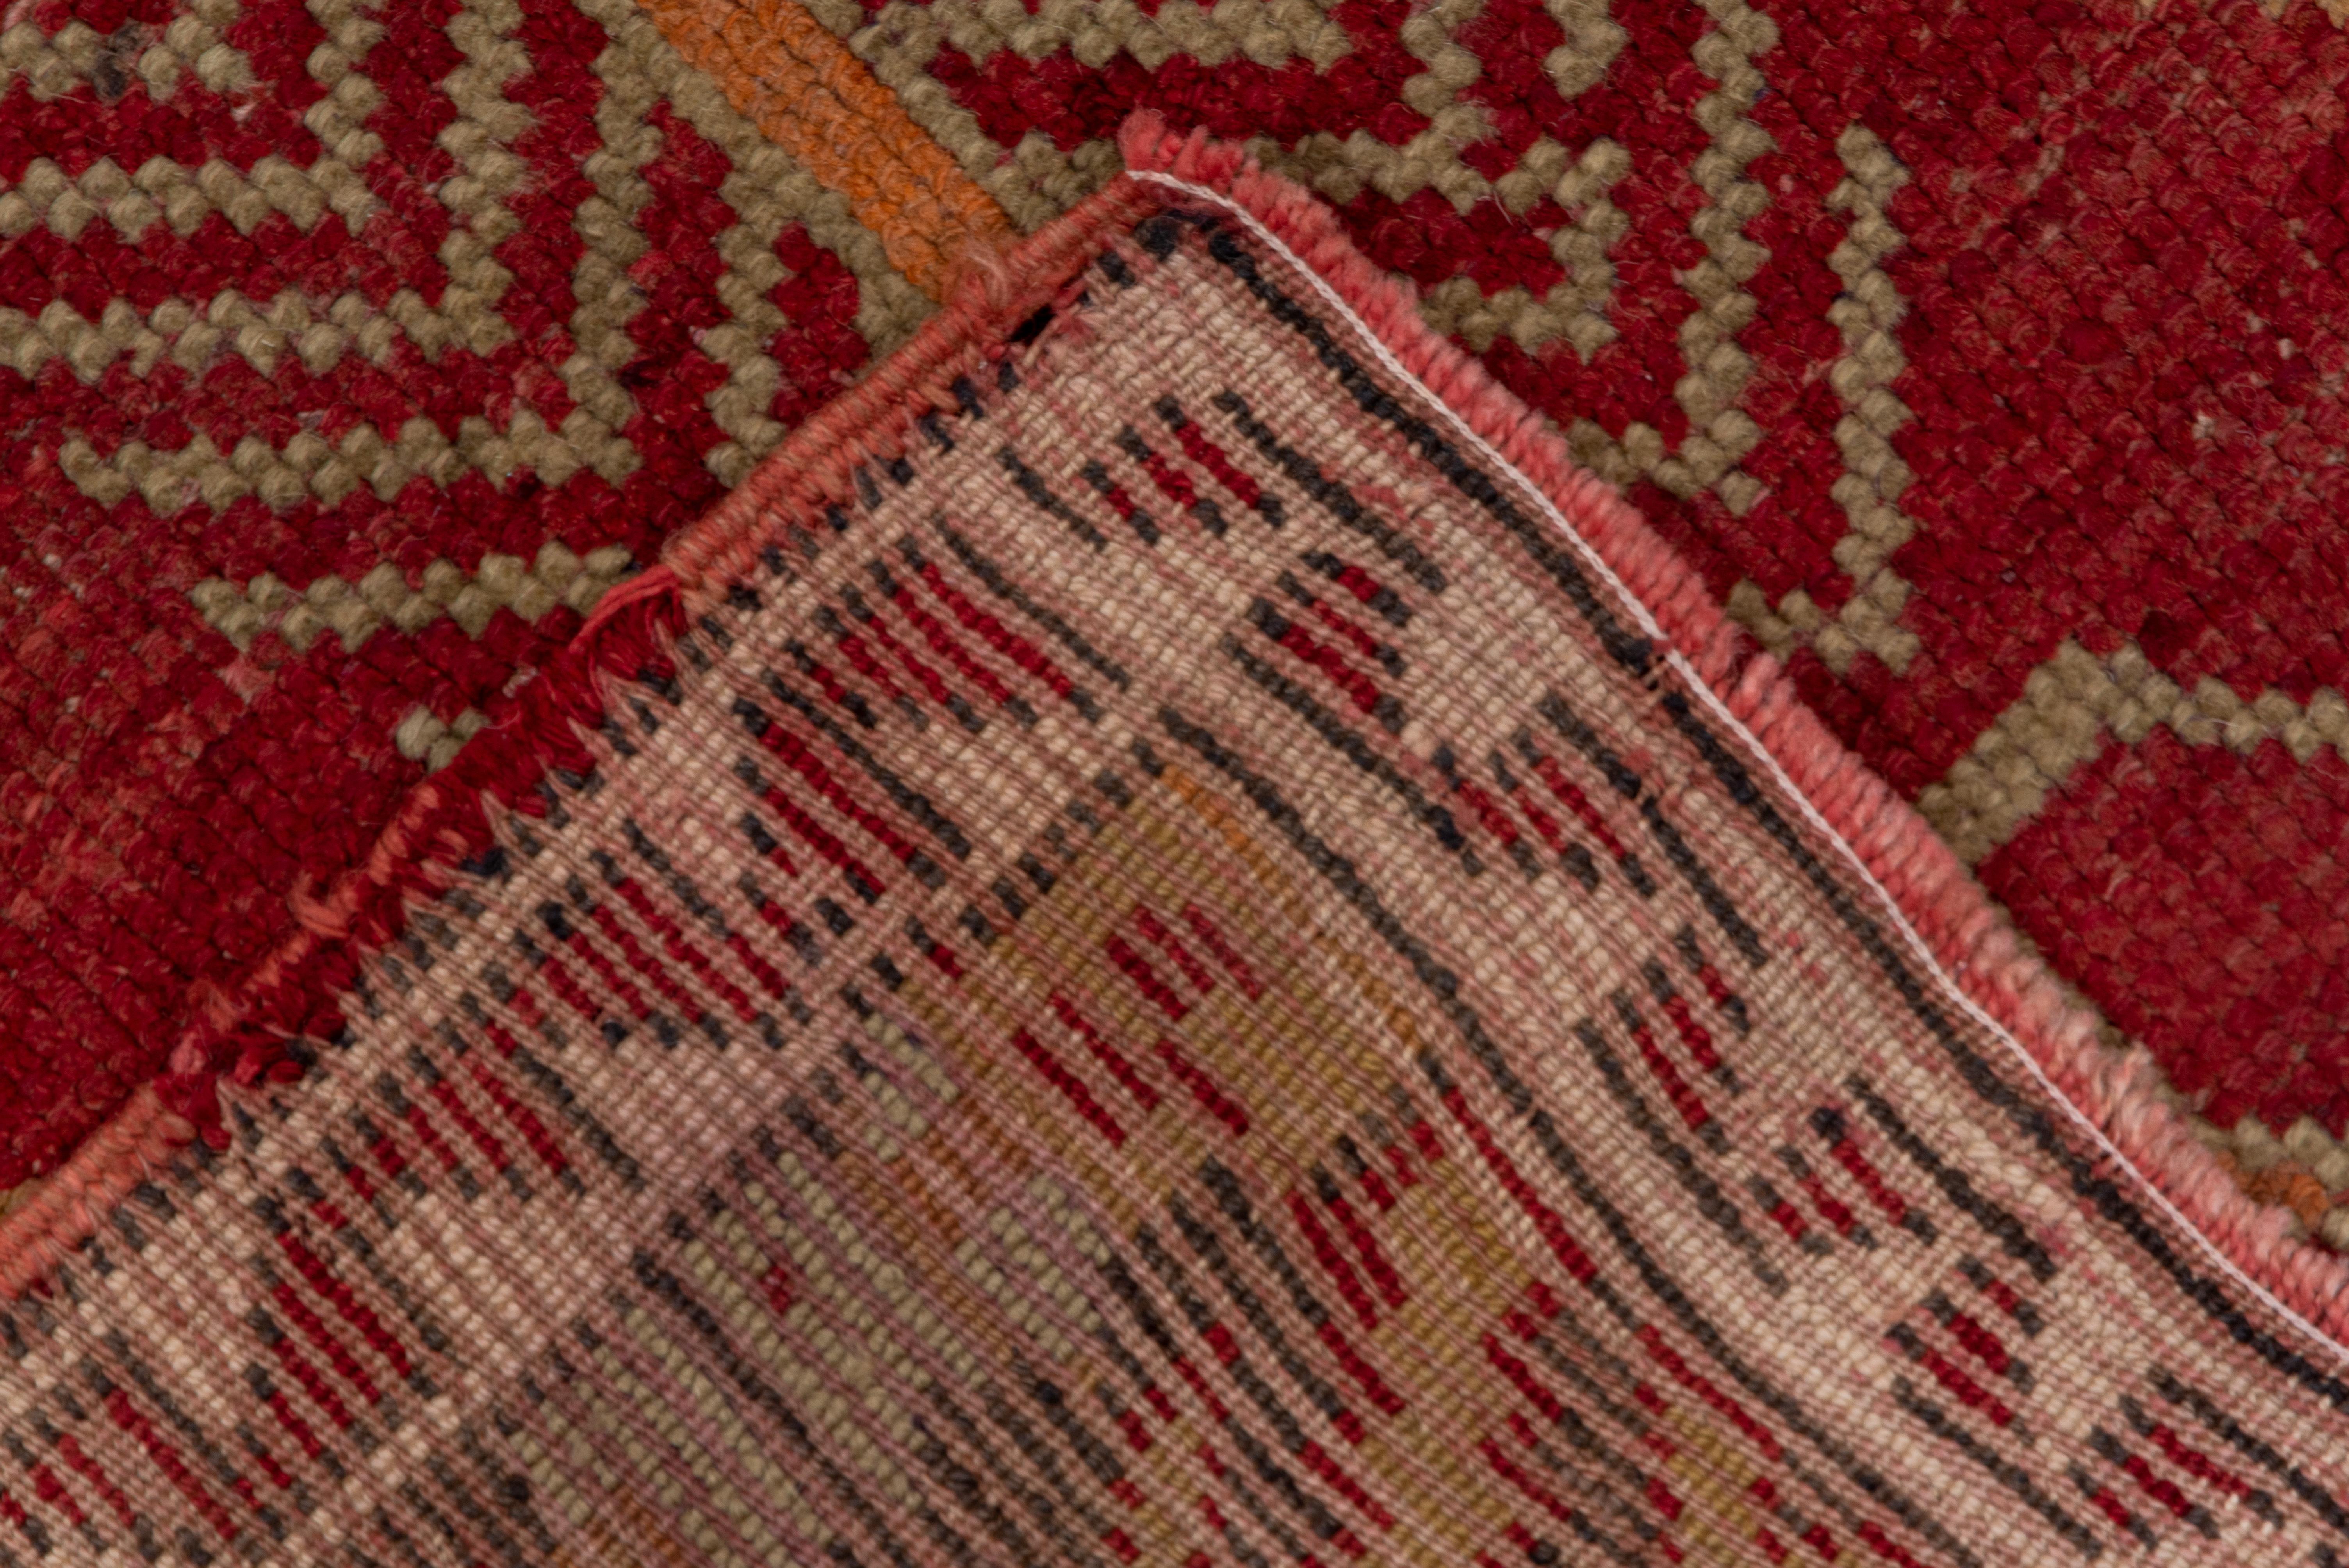 Hand-Knotted Antique Rustic Turkish Anatolian Gallery Carpet, Warm Colors, circa 1930s